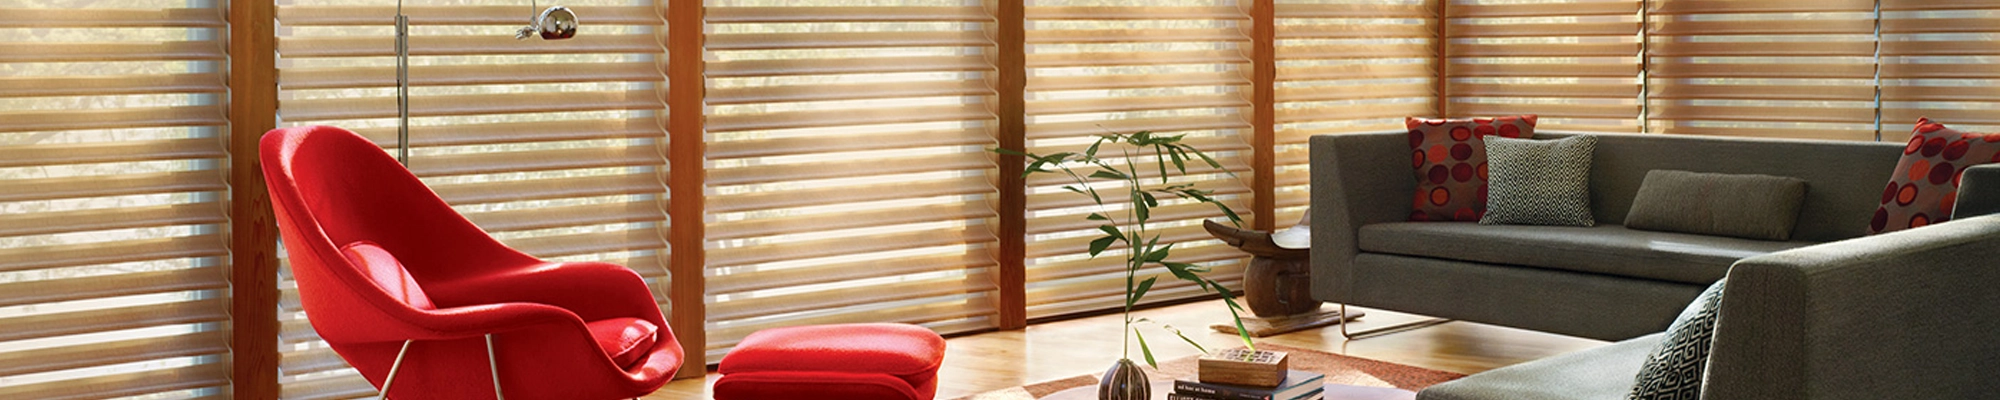 Window treatments provided by Gary Denney Floor Covering & Carpet Warehouse